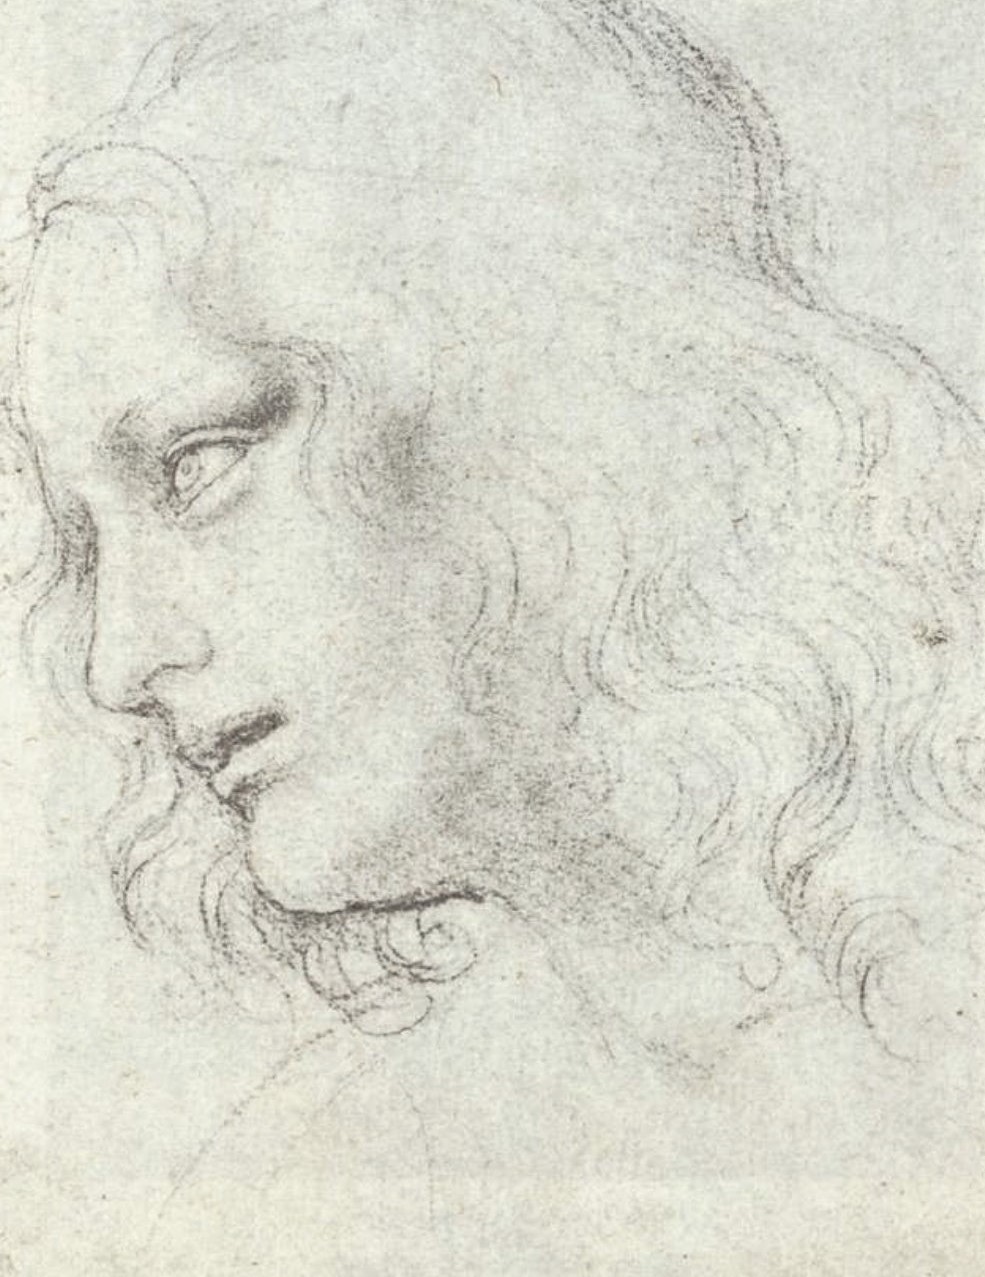 Collections of Drawings antique (11338).Jpg